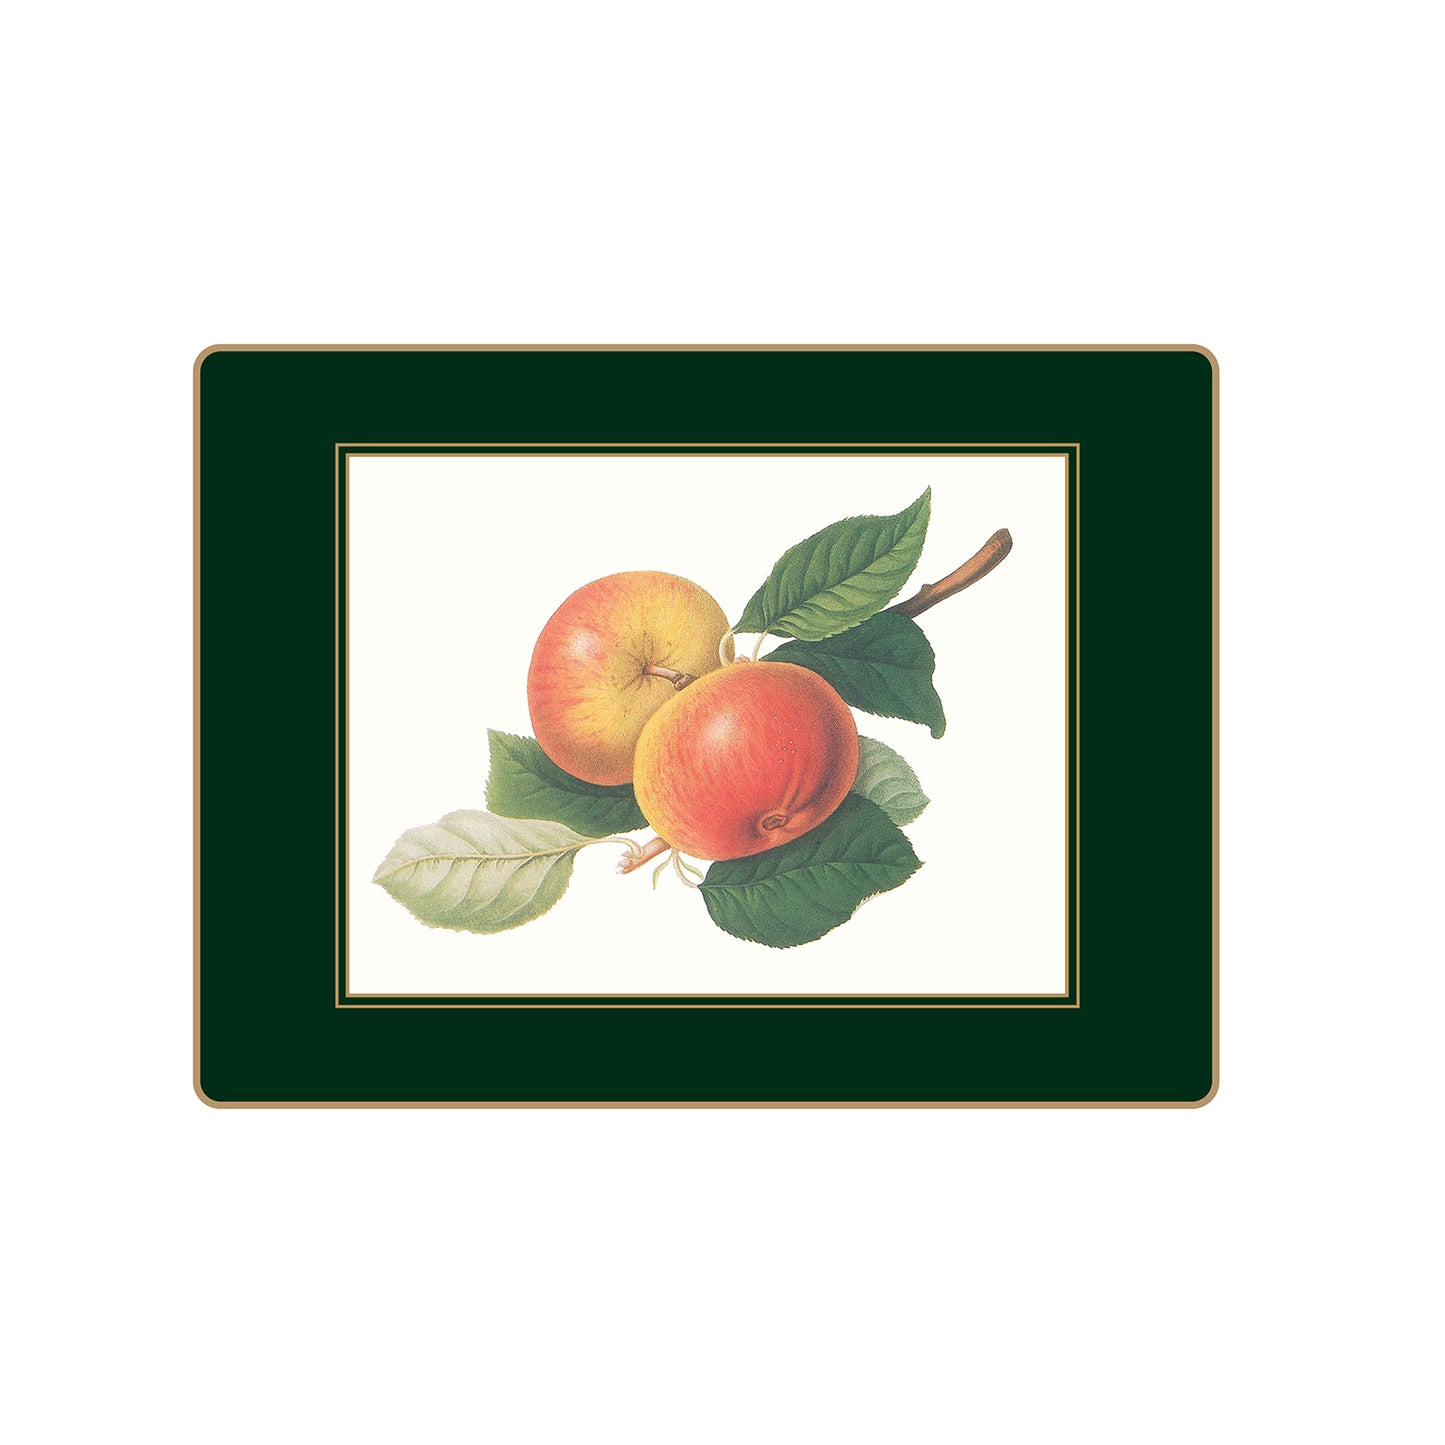 Traditional Placemats Hooker Fruits